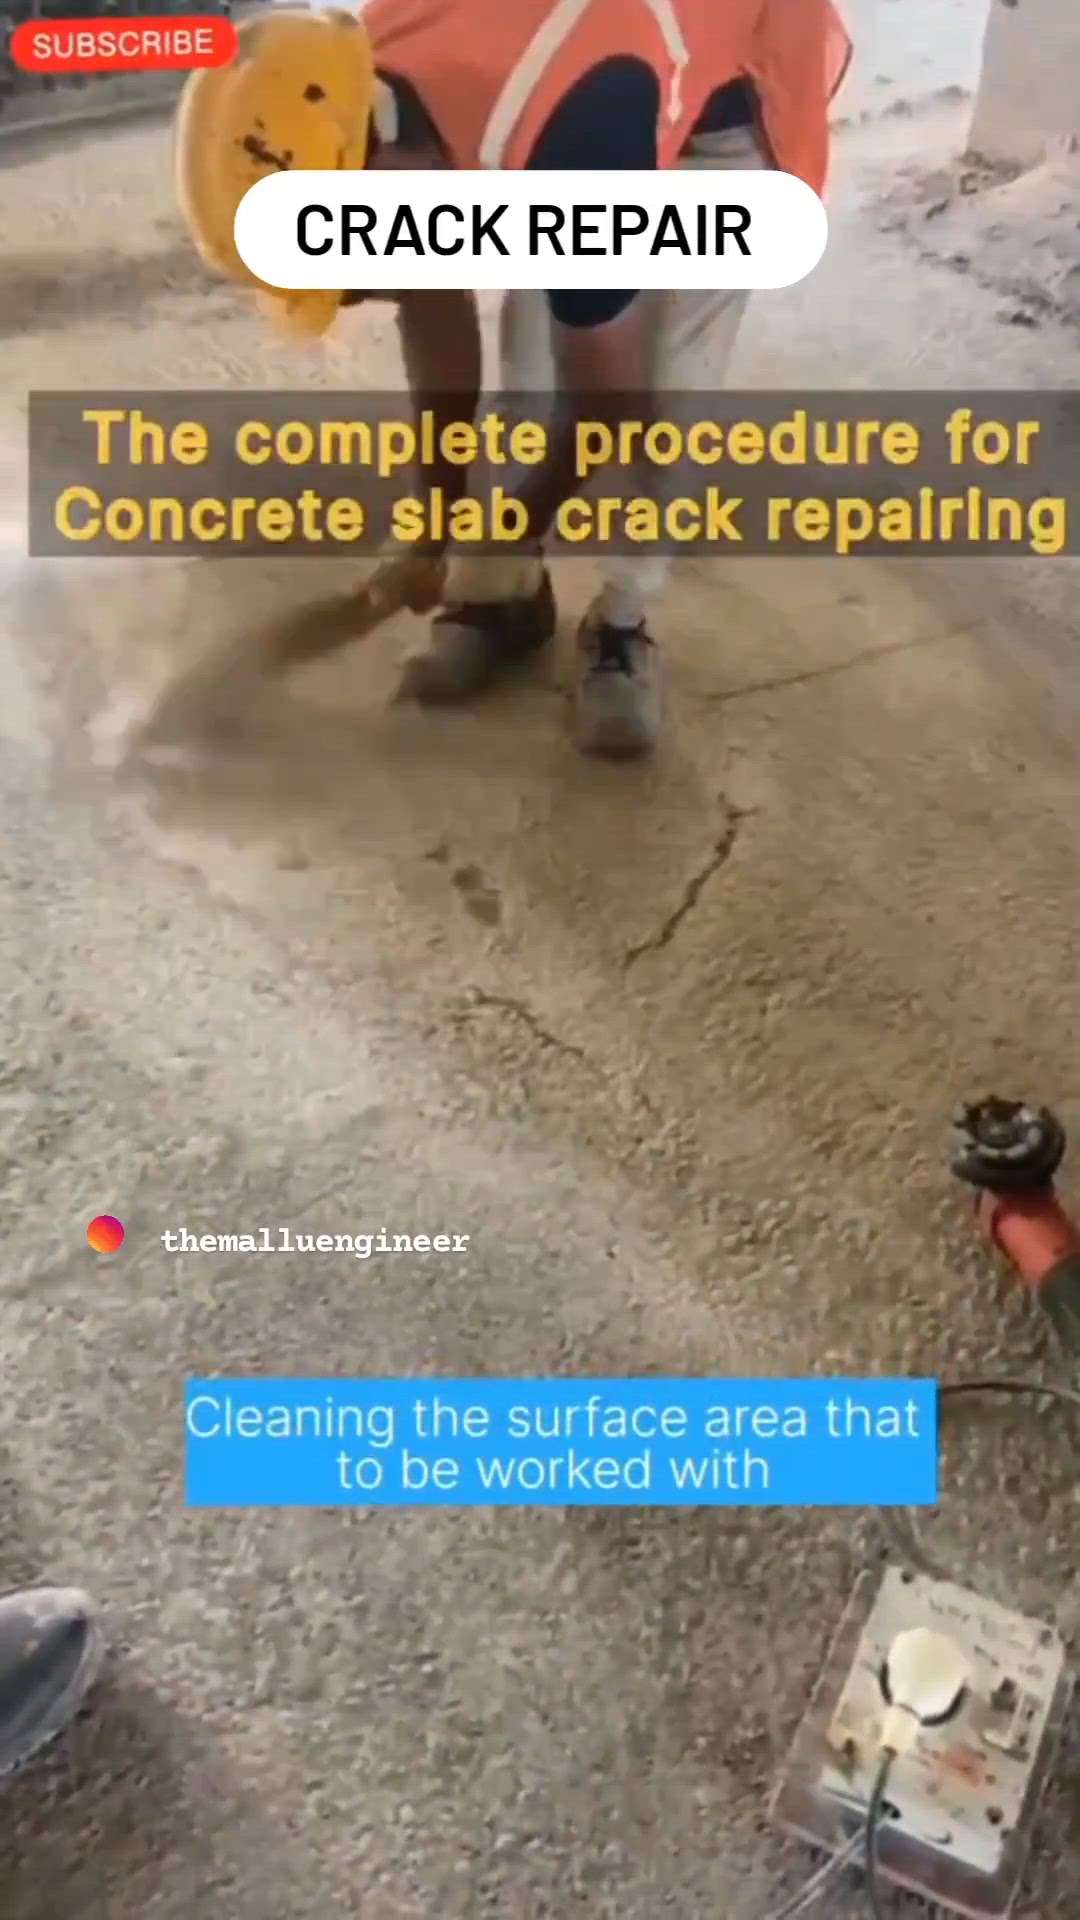 What is the best repair for cracks in concrete?

Wide cracks in concrete are best patched and sealed with a concrete patching compound. Smaller cracks, less than 1/4 inch wide, can be repaired with a concrete caulk or liquid filler. Patching compounds typically are mixed with water and applied with a trowel.

 #concrete #crackfilling  #crackrepairing